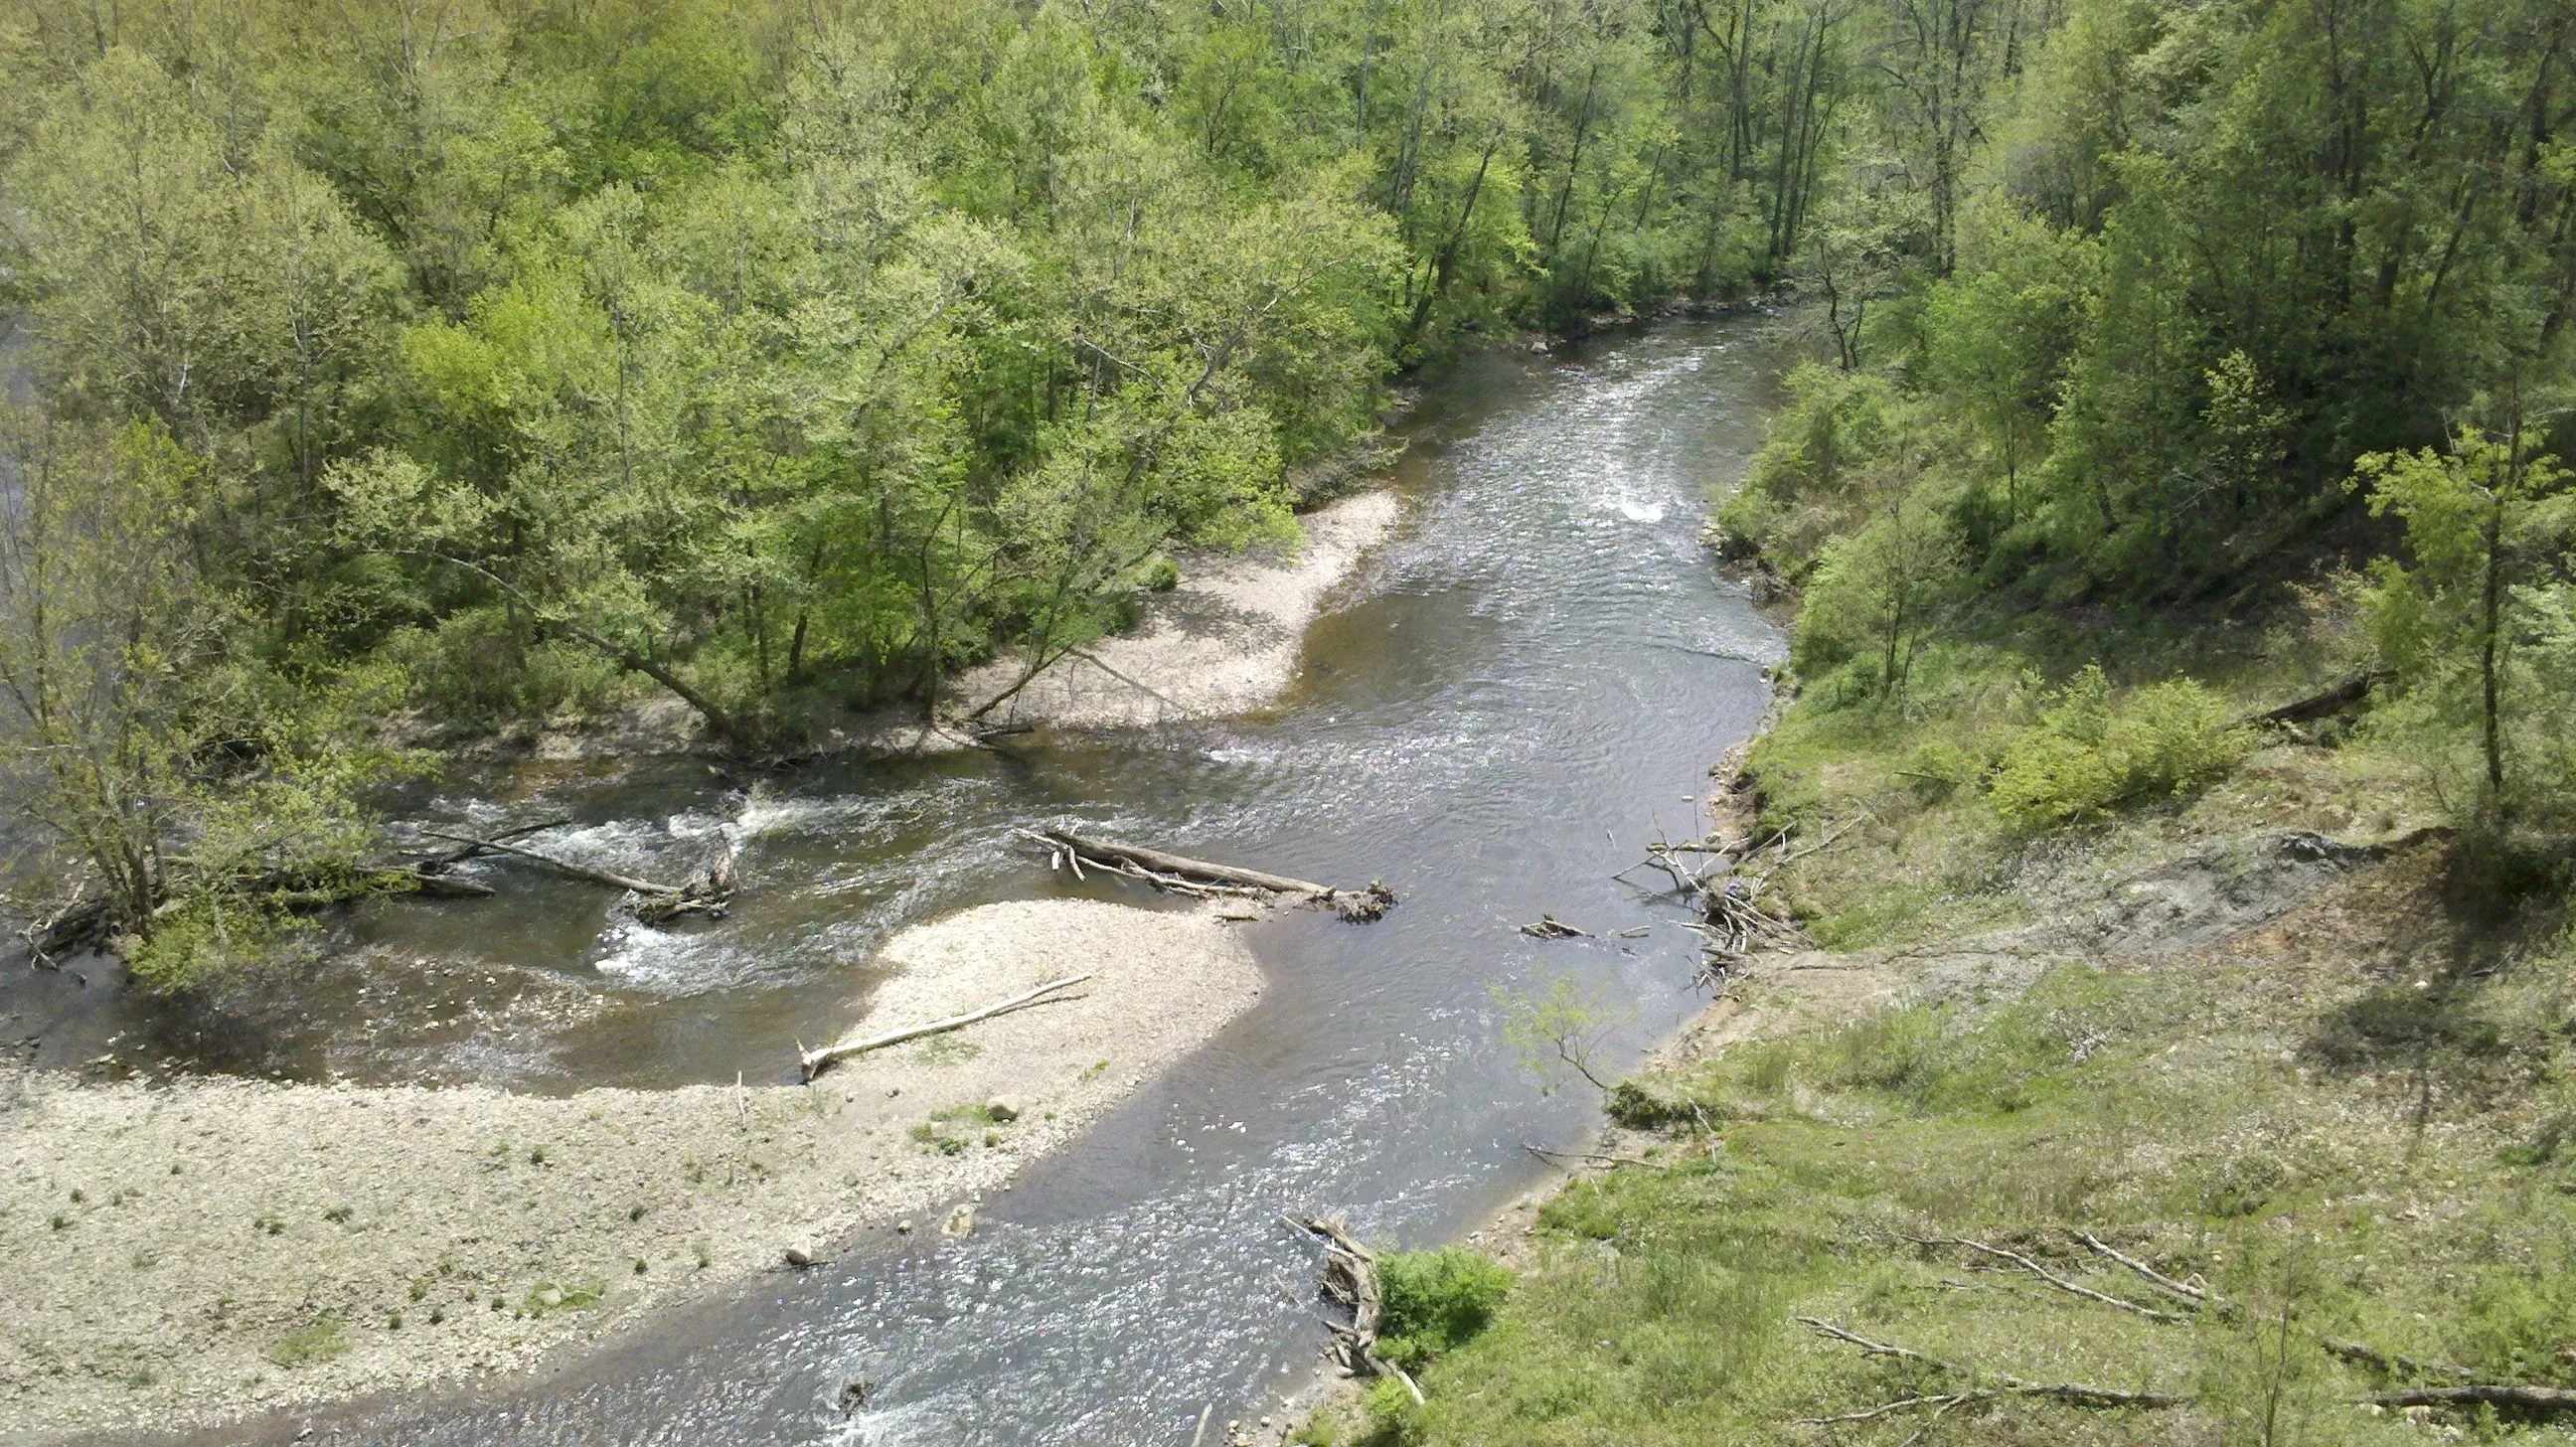 A view from an overlook deck where you can see a nice bend in the Cuyahoga River